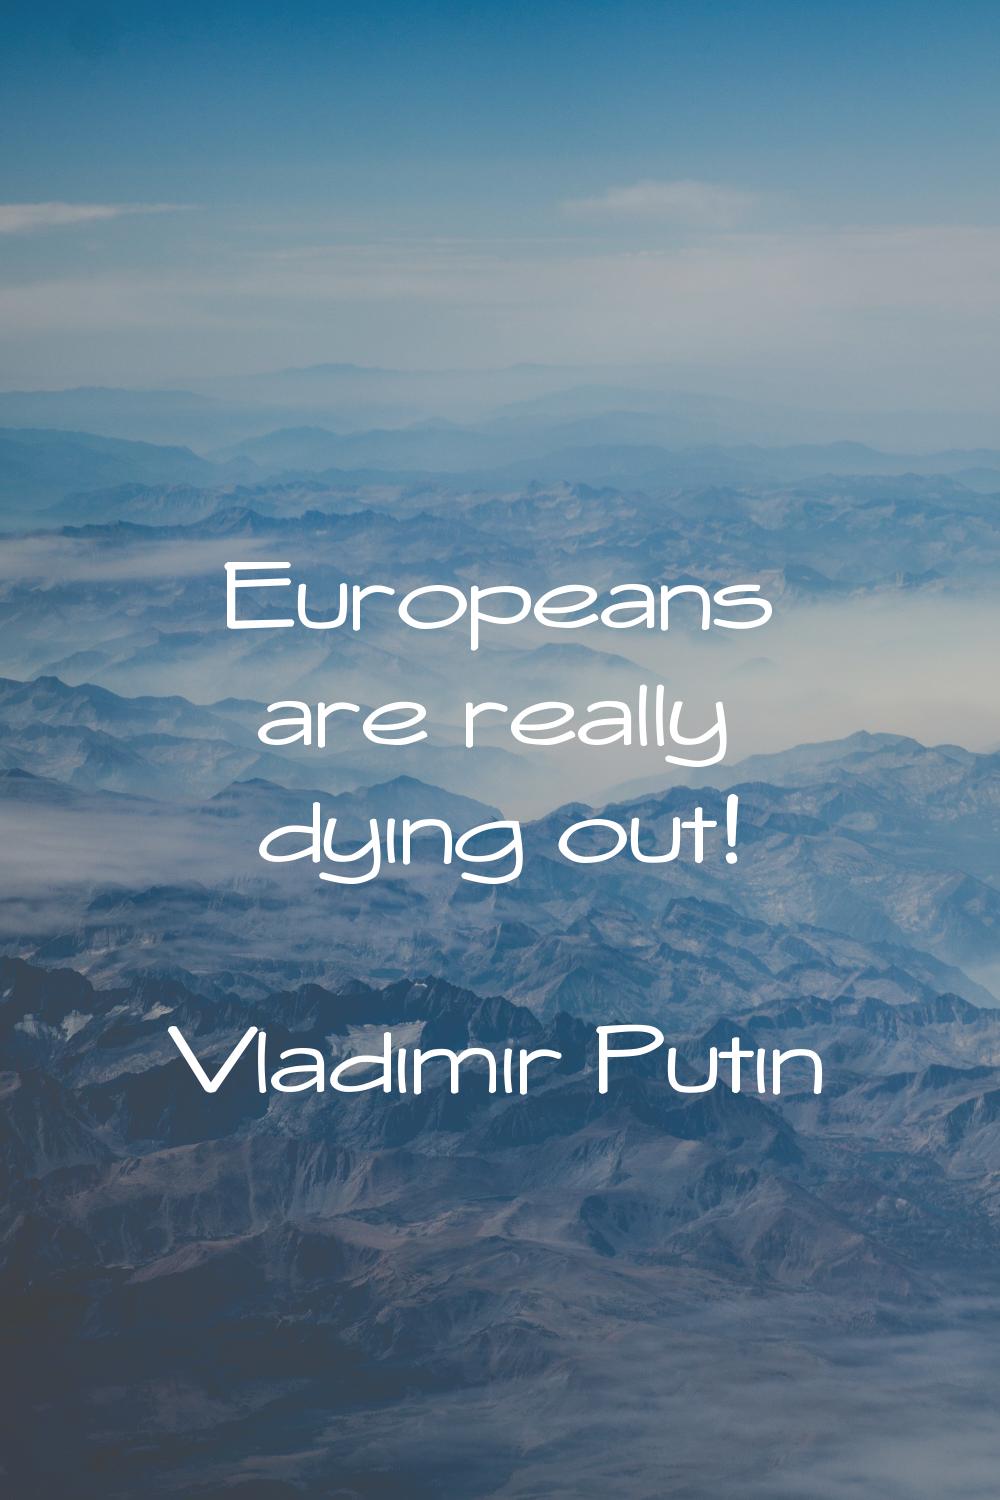 Europeans are really dying out!